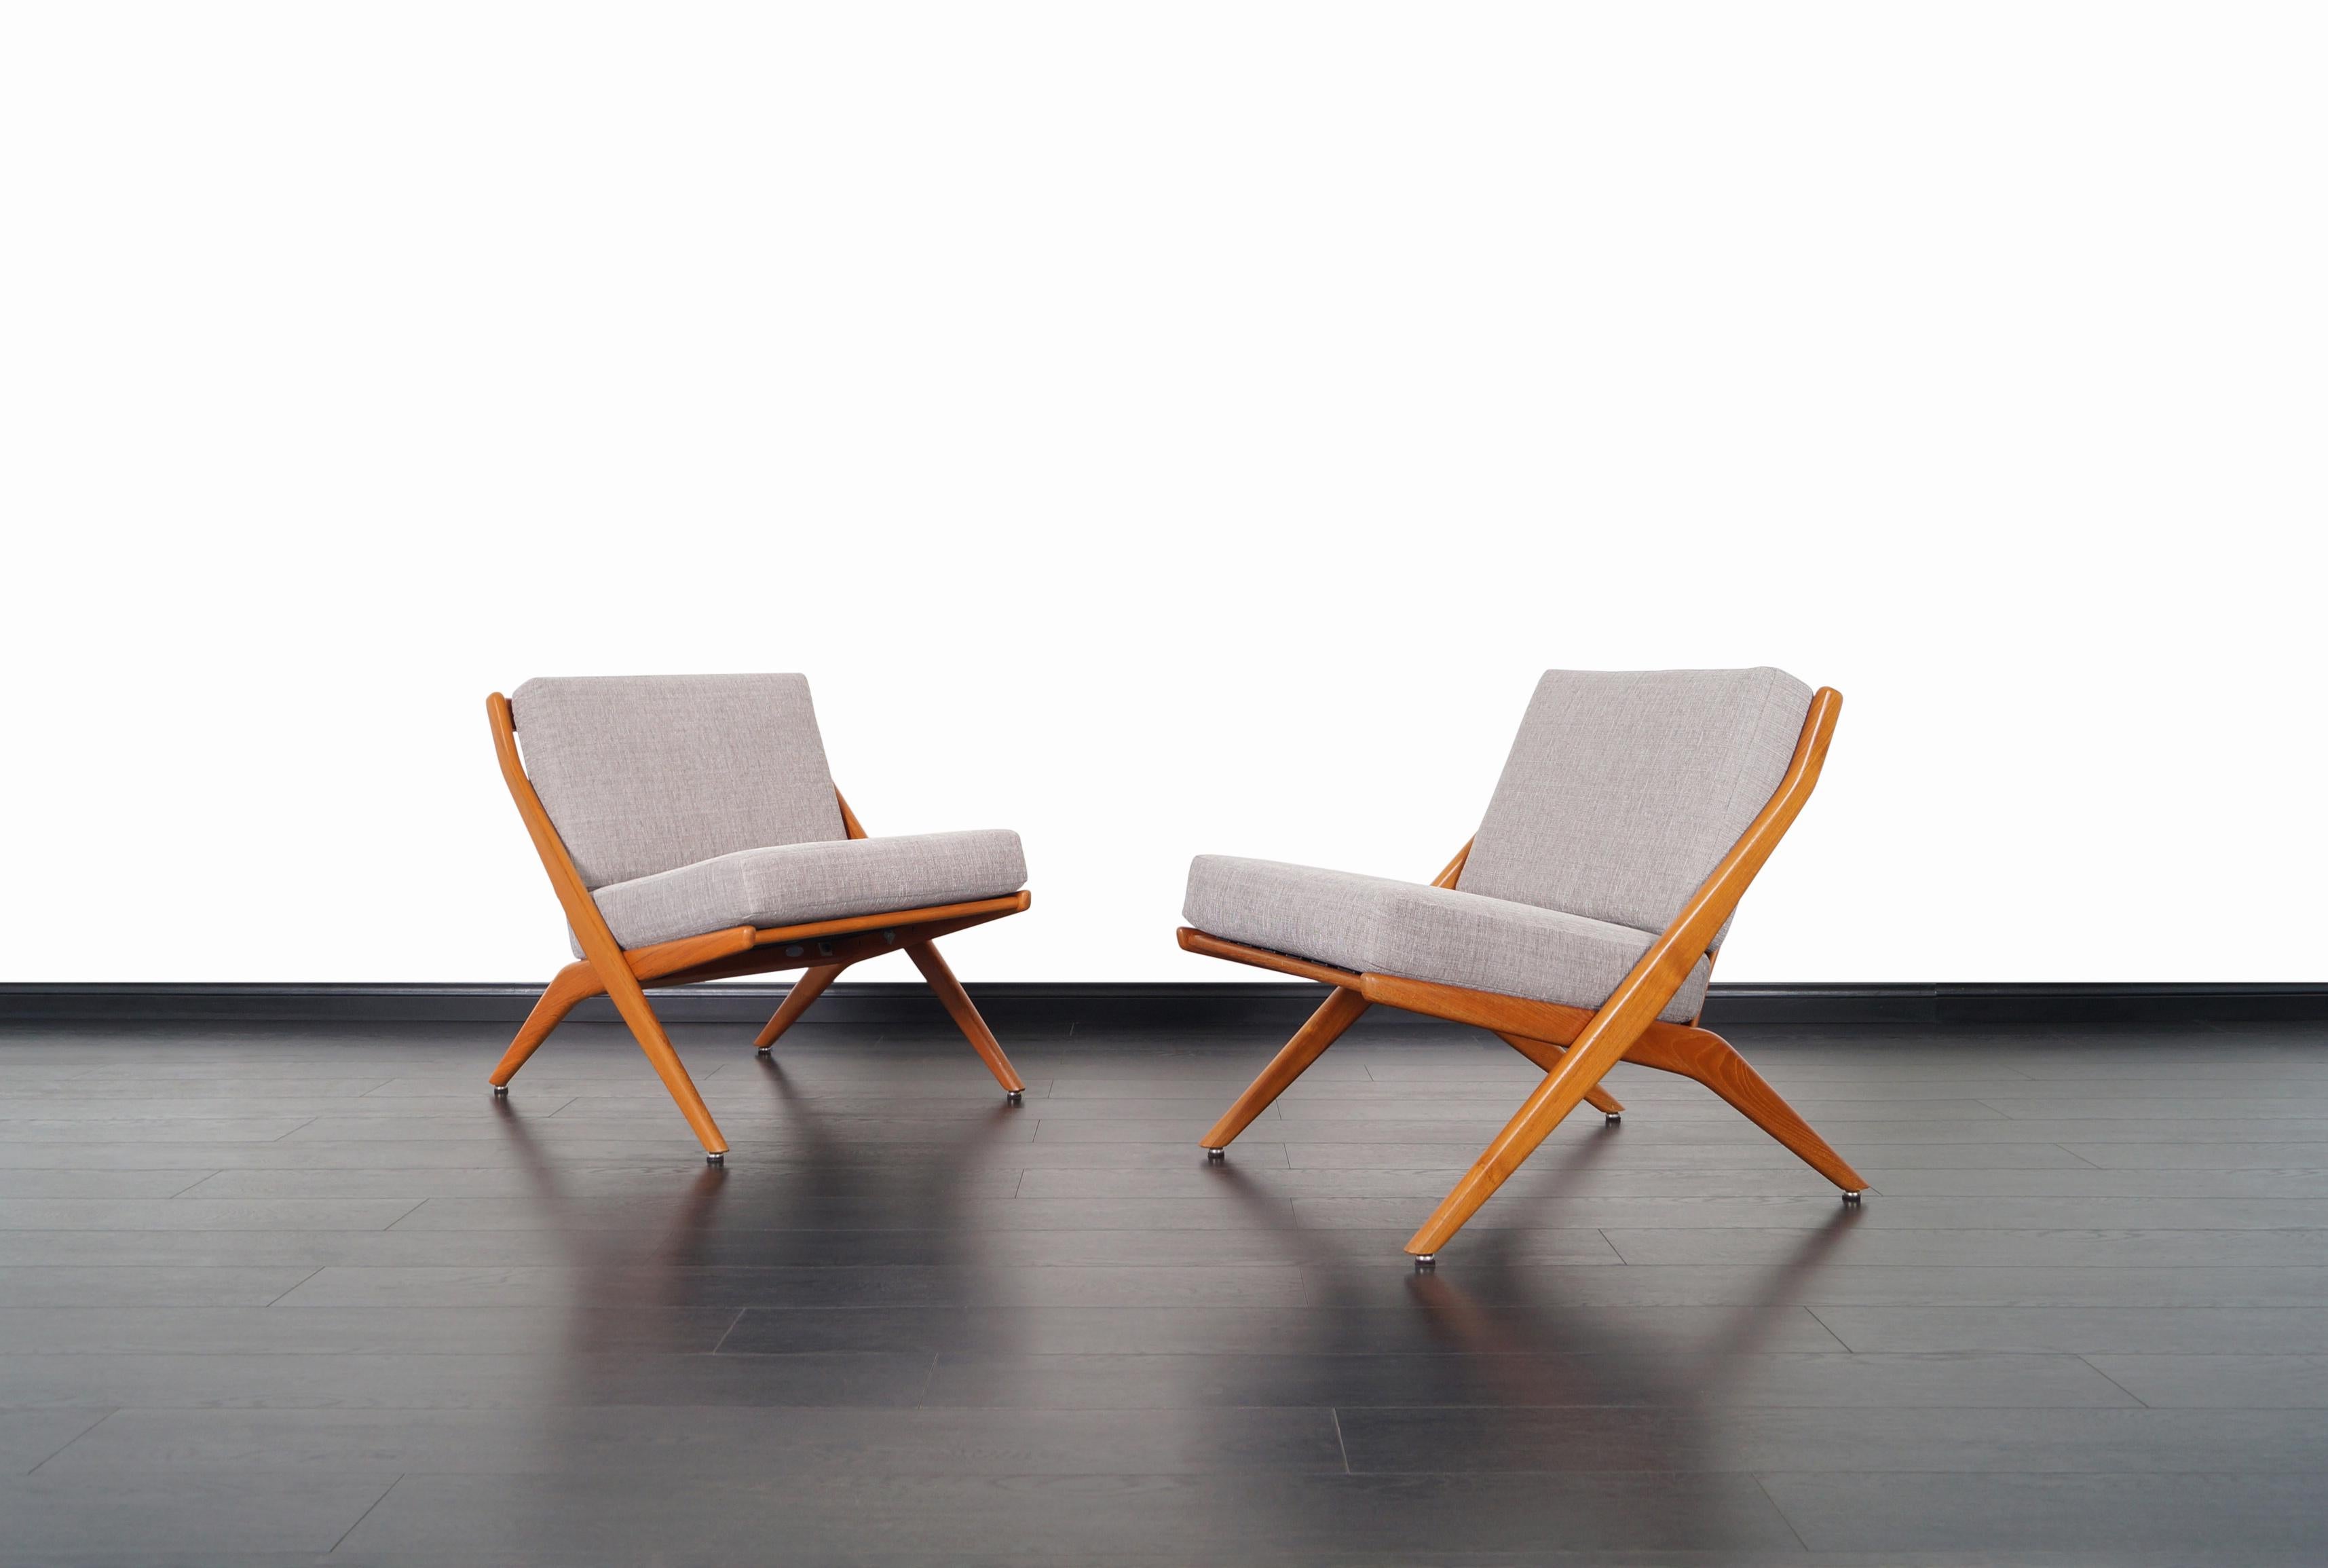 A stunning pair of vintage lounge chairs designed by Folke Ohlsson for Dux of Sweden, circa 1950s. These elegant Scandinavian design chairs feature a 